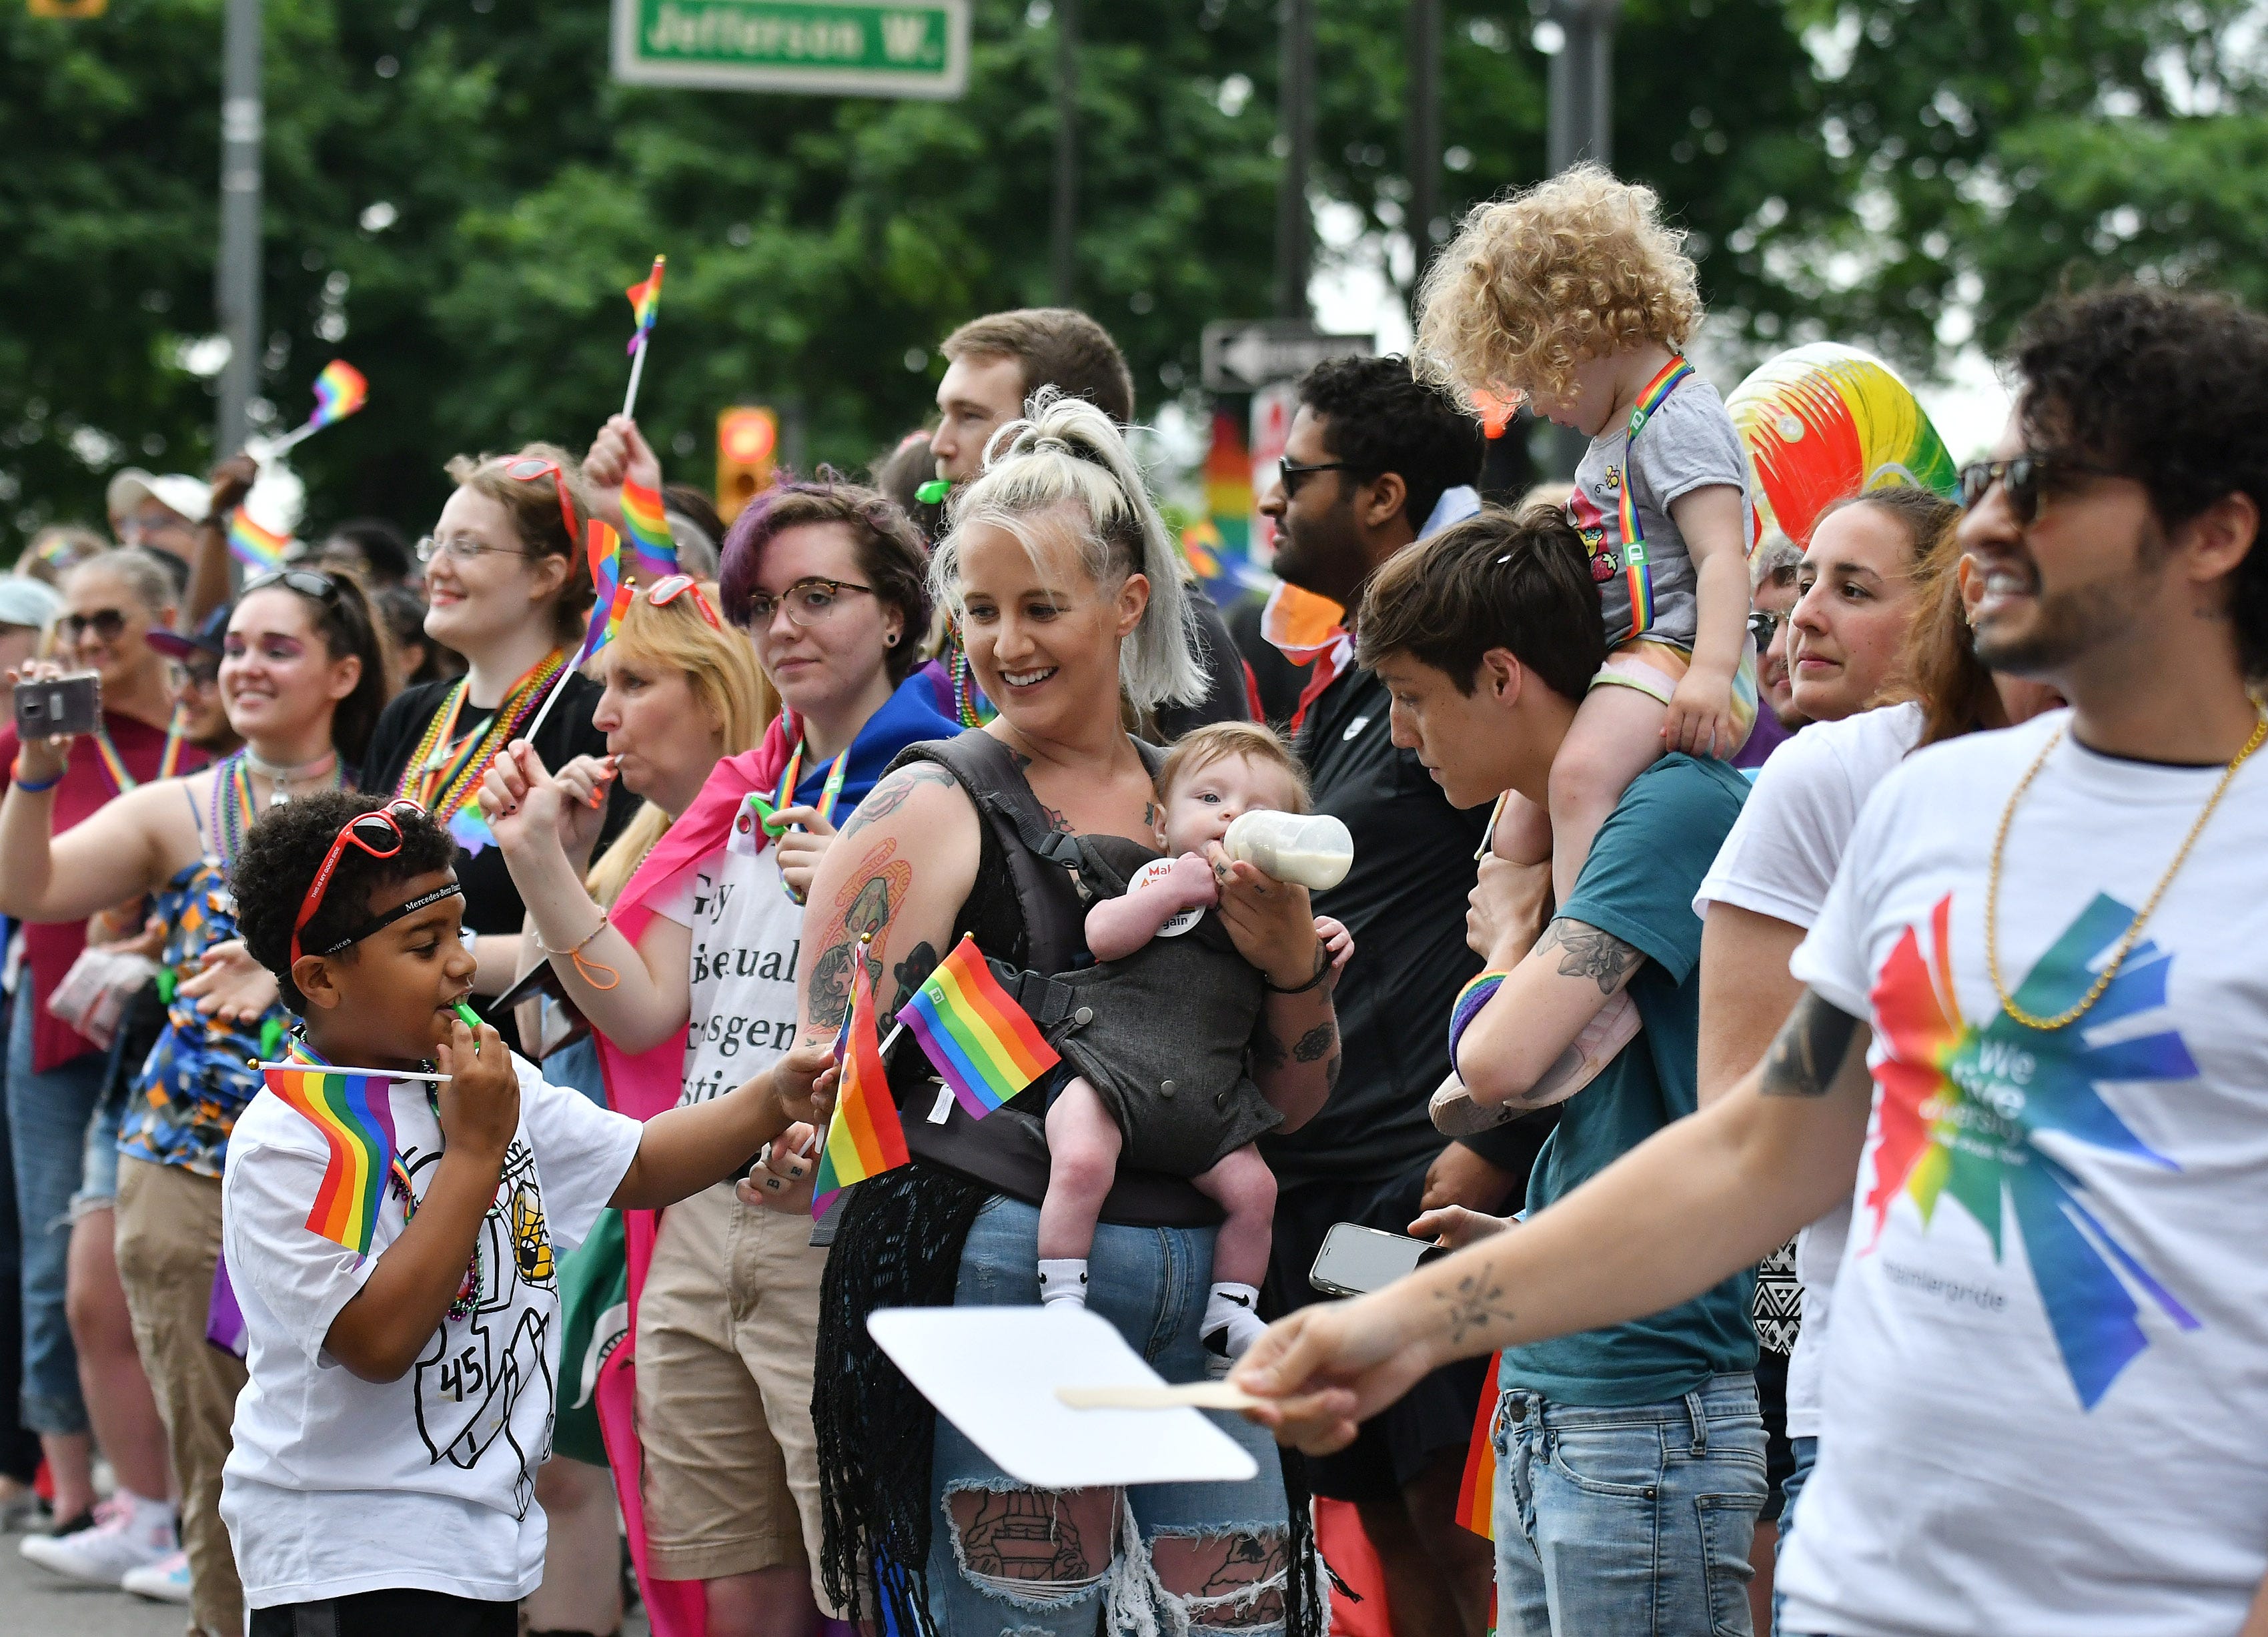 From left, James Shavers, 8, passes a flag to his mom, Allison Gressman, 30, of Warren holding five-month-old Atlas Dunne with Allyssa Palmer, 28, of Taylor with Charlotte Dunne, 1, on her shoulders at the parade.